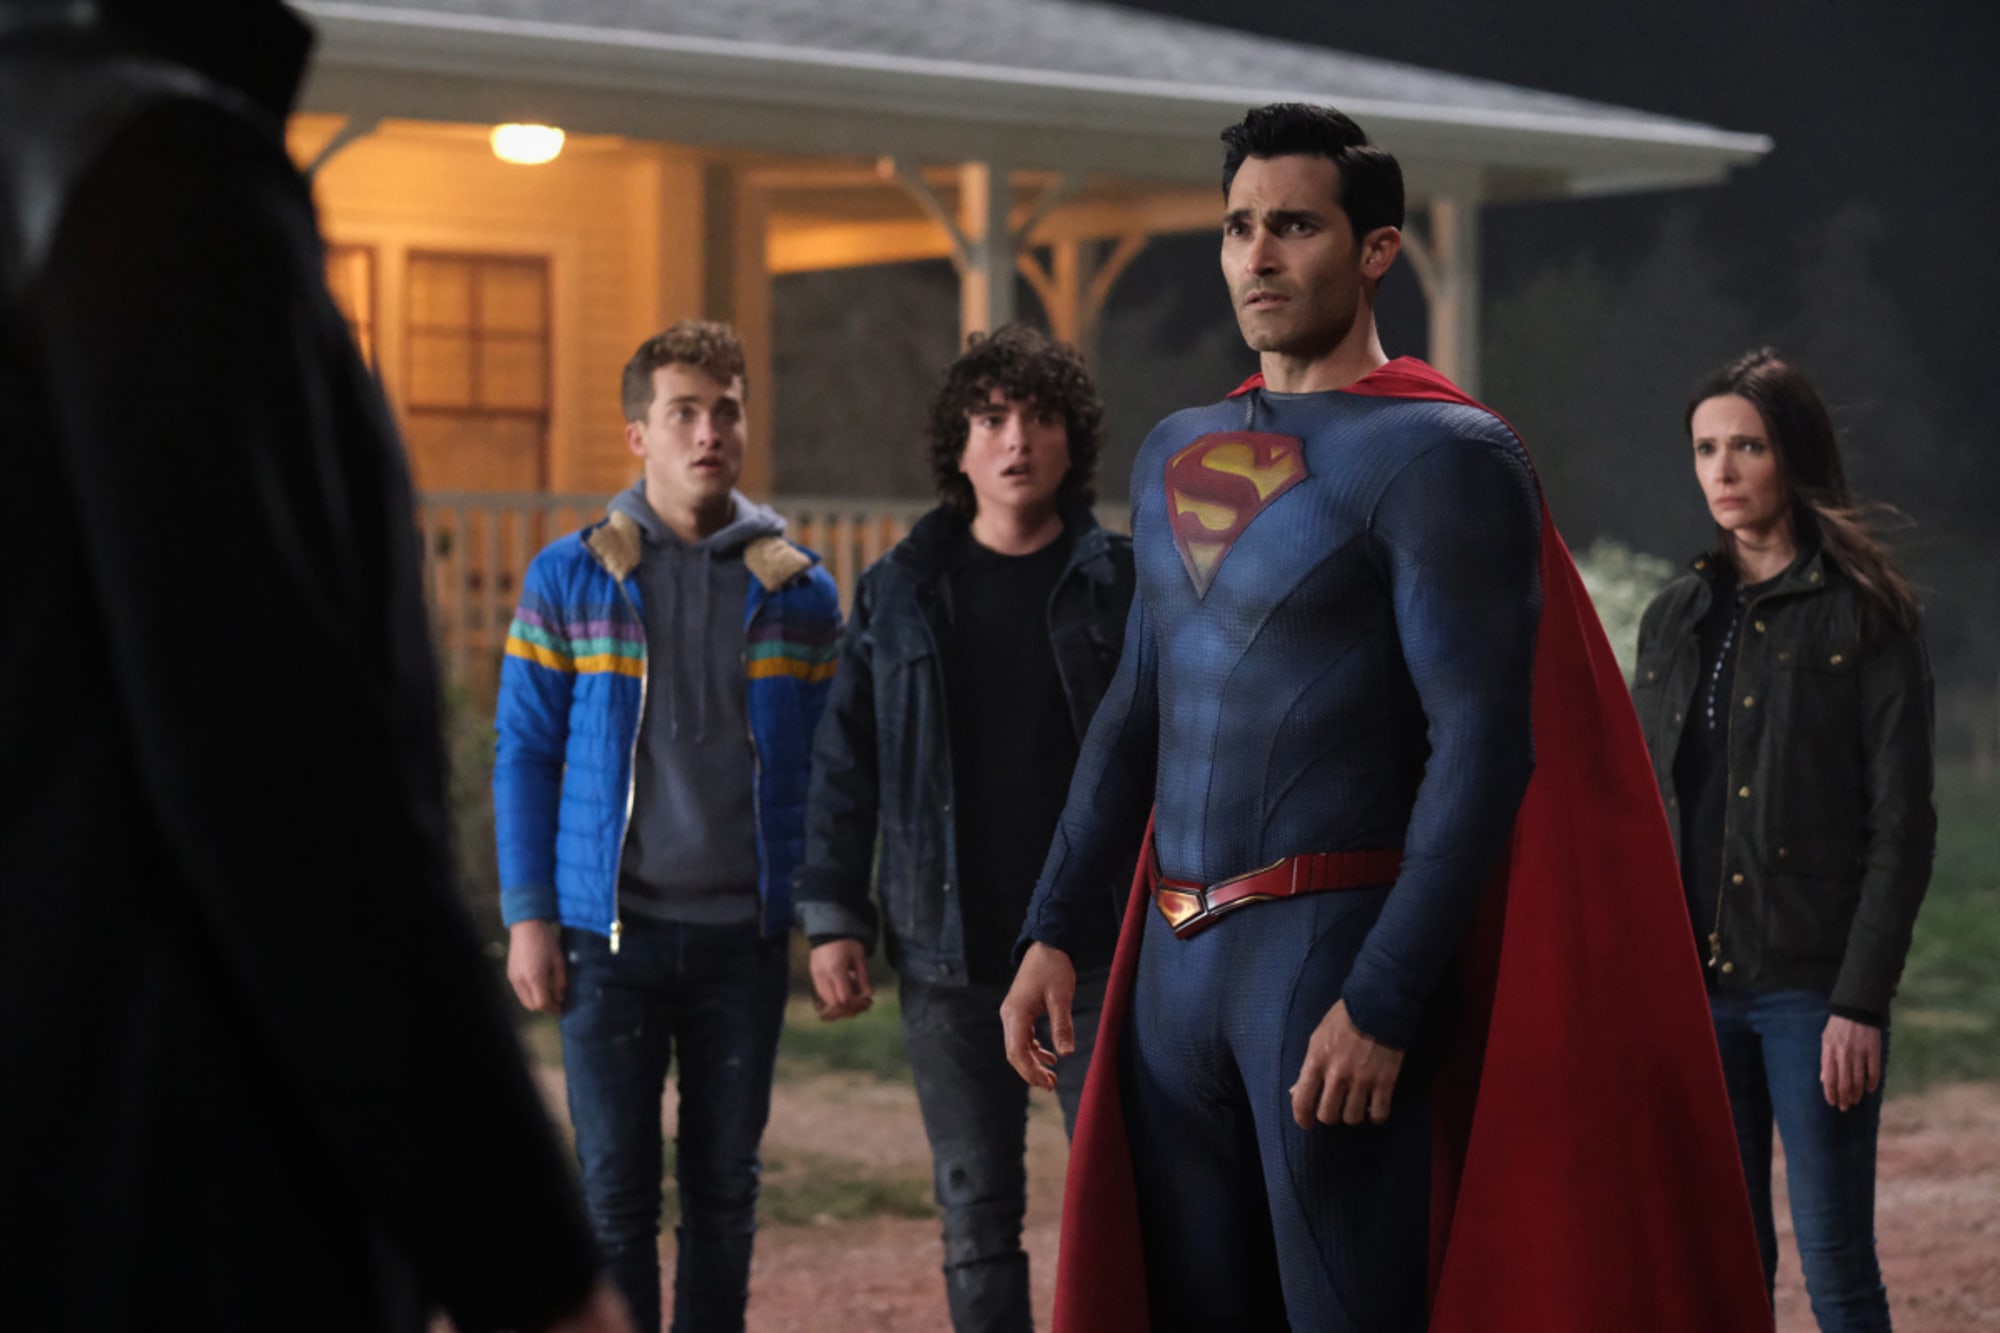 1. His relationship with his Son: Superman only has one Son in the comic. However, in the show, he has two, and only one of them has powers. Superman tries to balance saving the world and bringing up his sons, training them, teaching them how to be, and being a good dad for both of them. He instructs both of them and tries his best to keep them out of trouble.